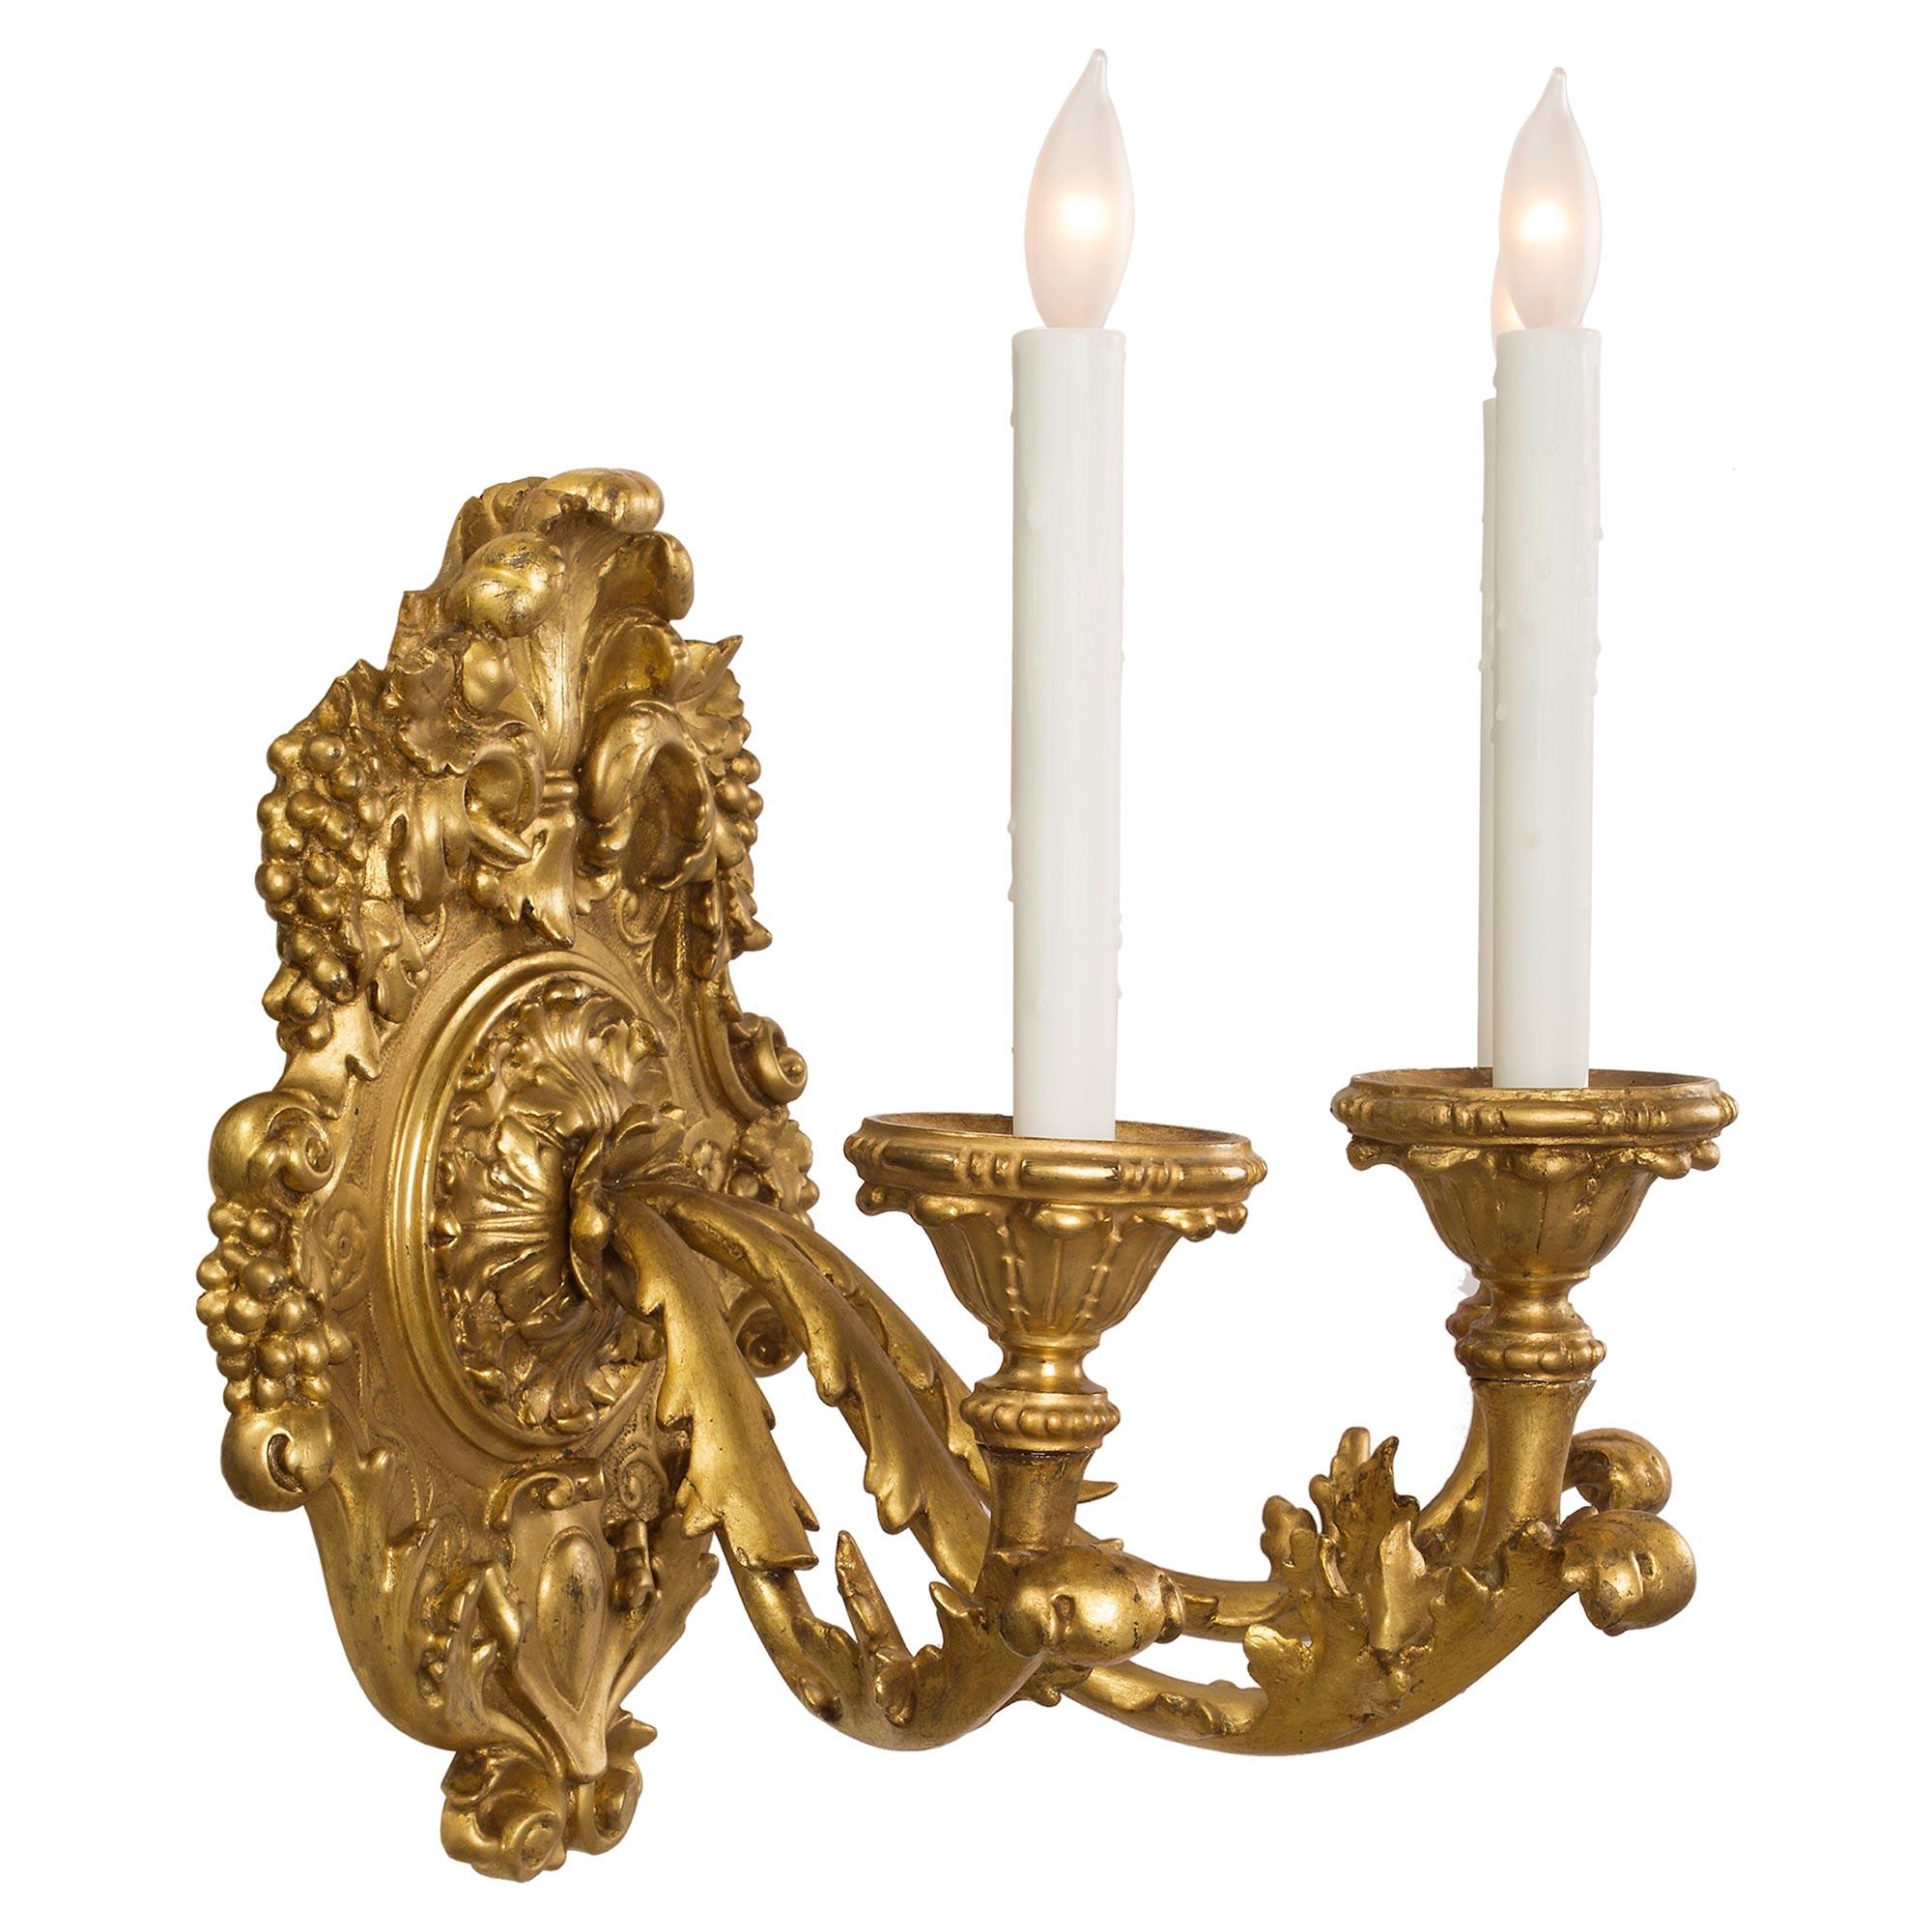 Pair of Italian Early 19th Century Louis XV Style Three-Arm Giltwood Sconces In Good Condition For Sale In West Palm Beach, FL